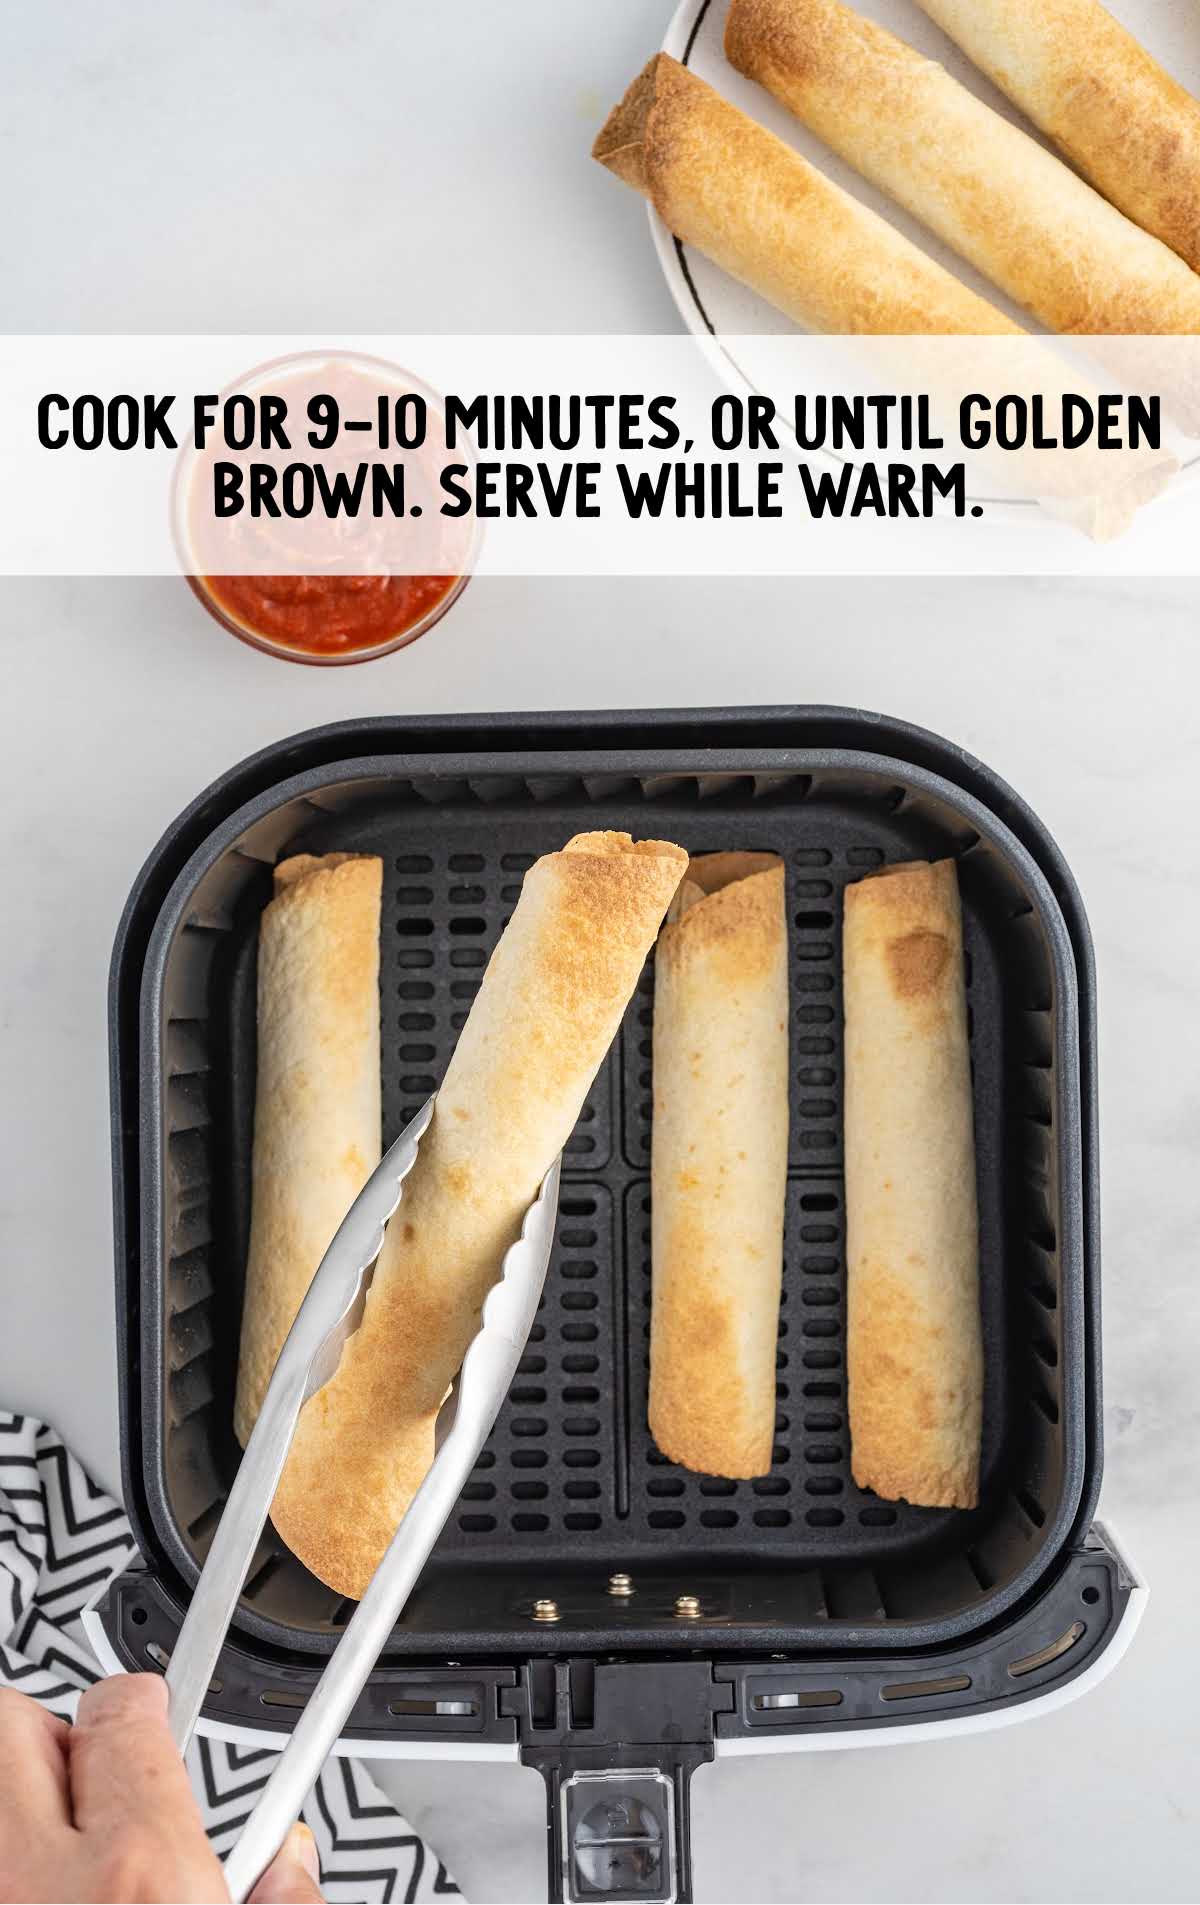 cook pizza roll on a air fryer